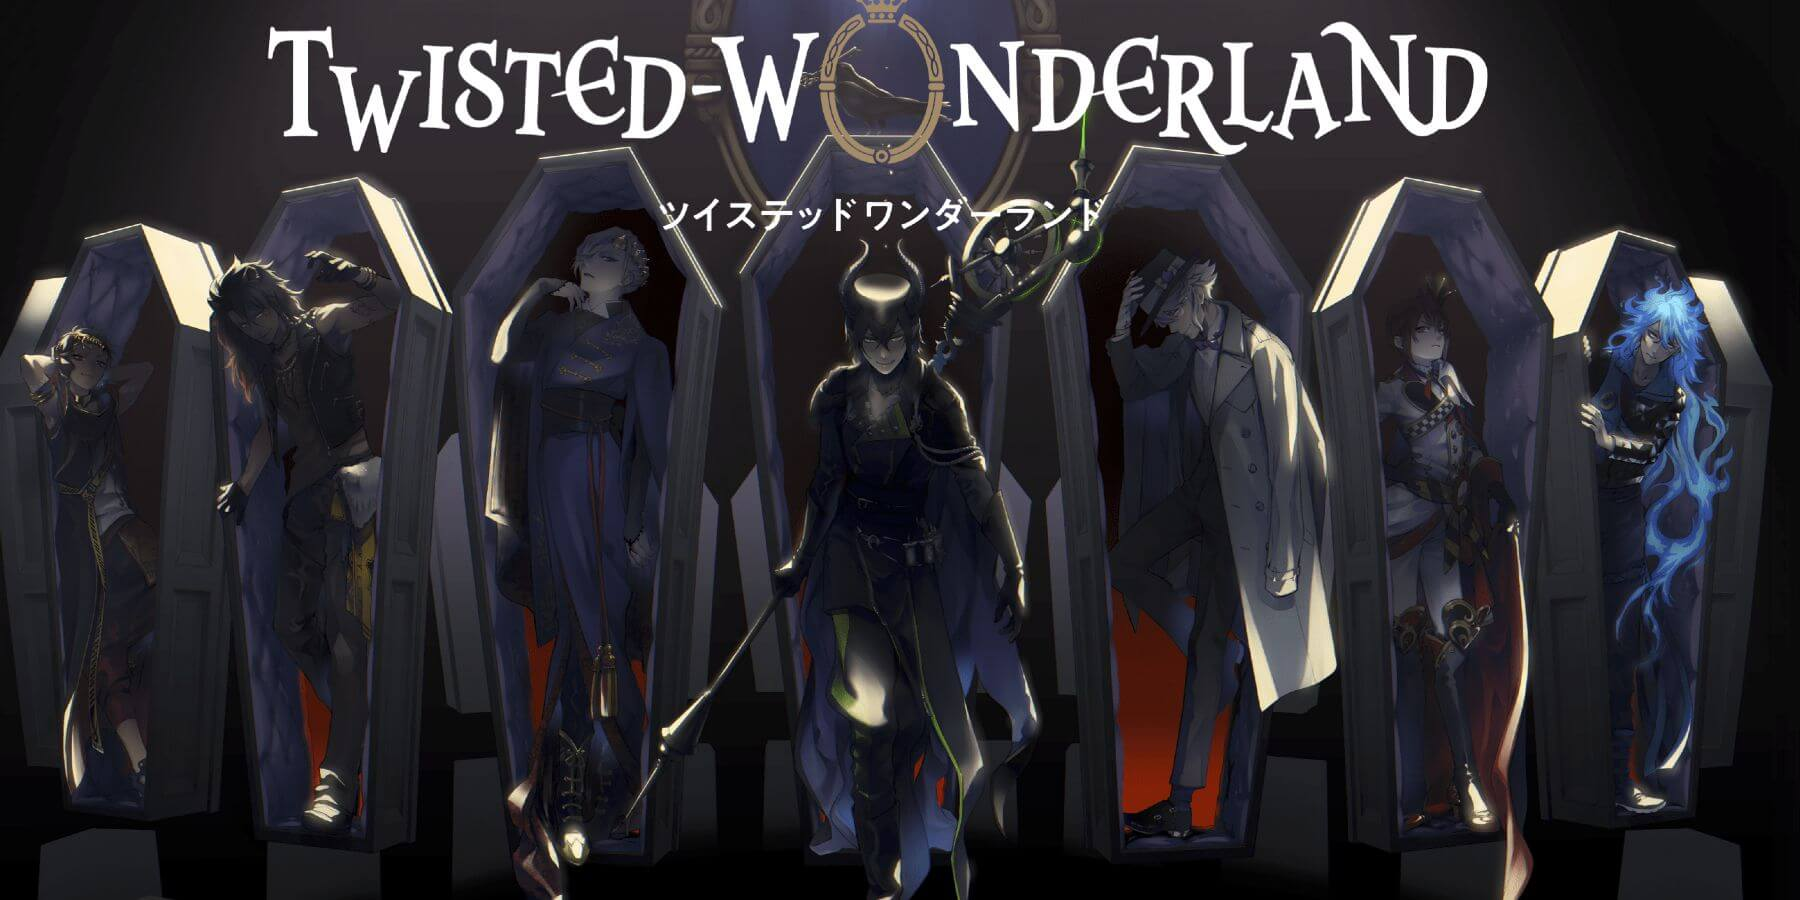 What is Twisted Wonderland?